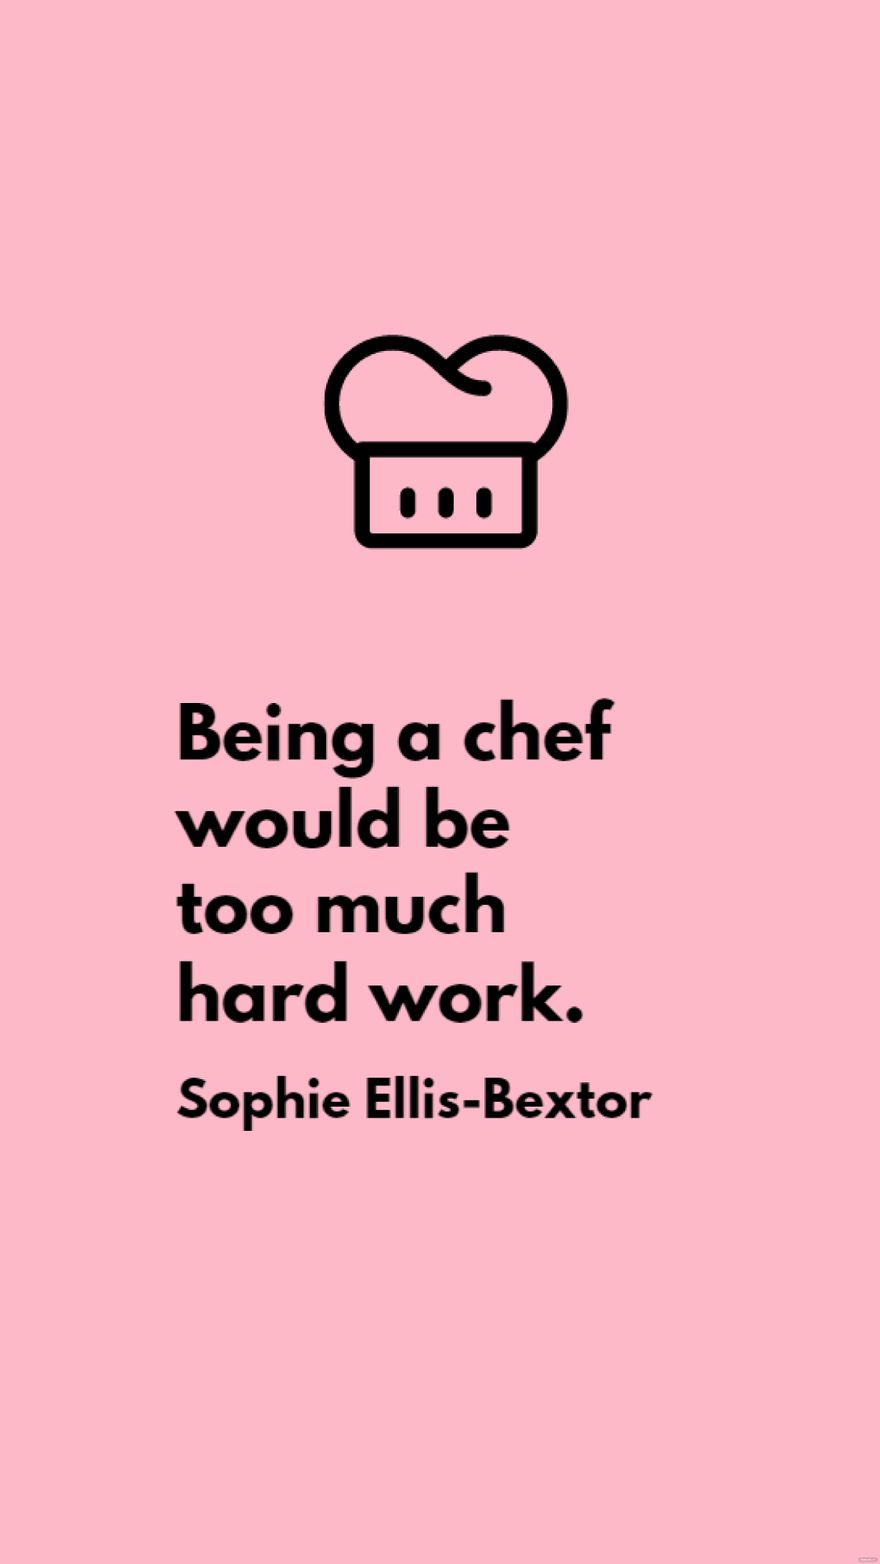 Sophie Ellis-Bextor - Being a chef would be too much hard work.